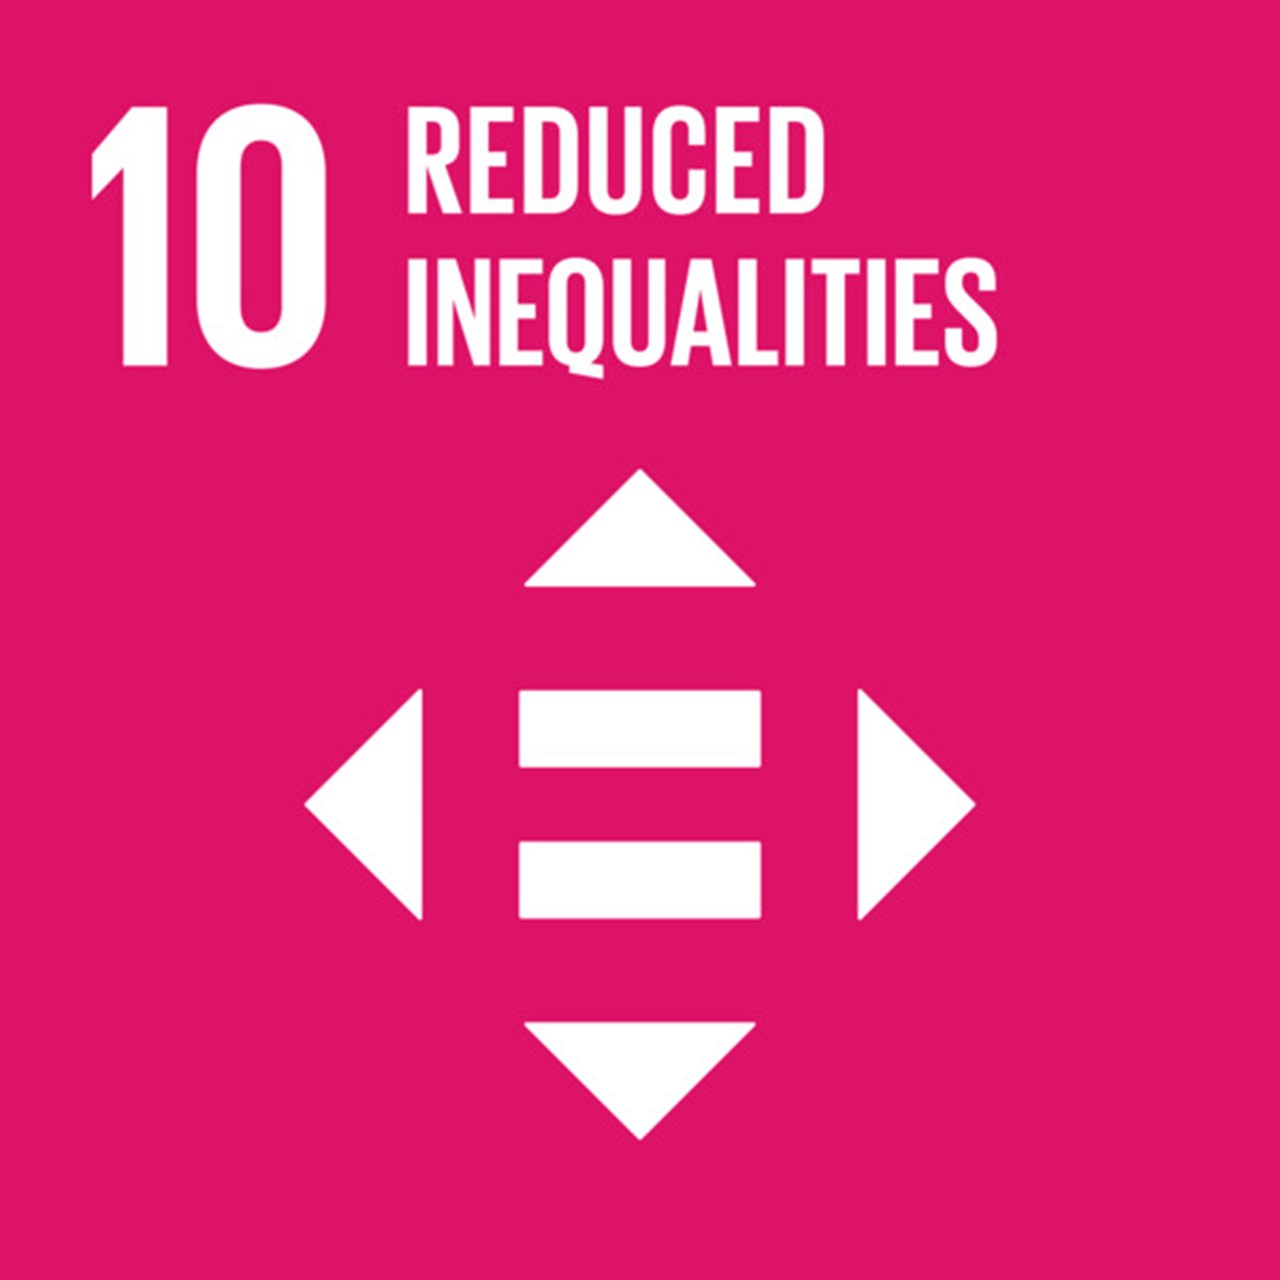 The Global Goals, Goal 10 - Reduced Inequalities